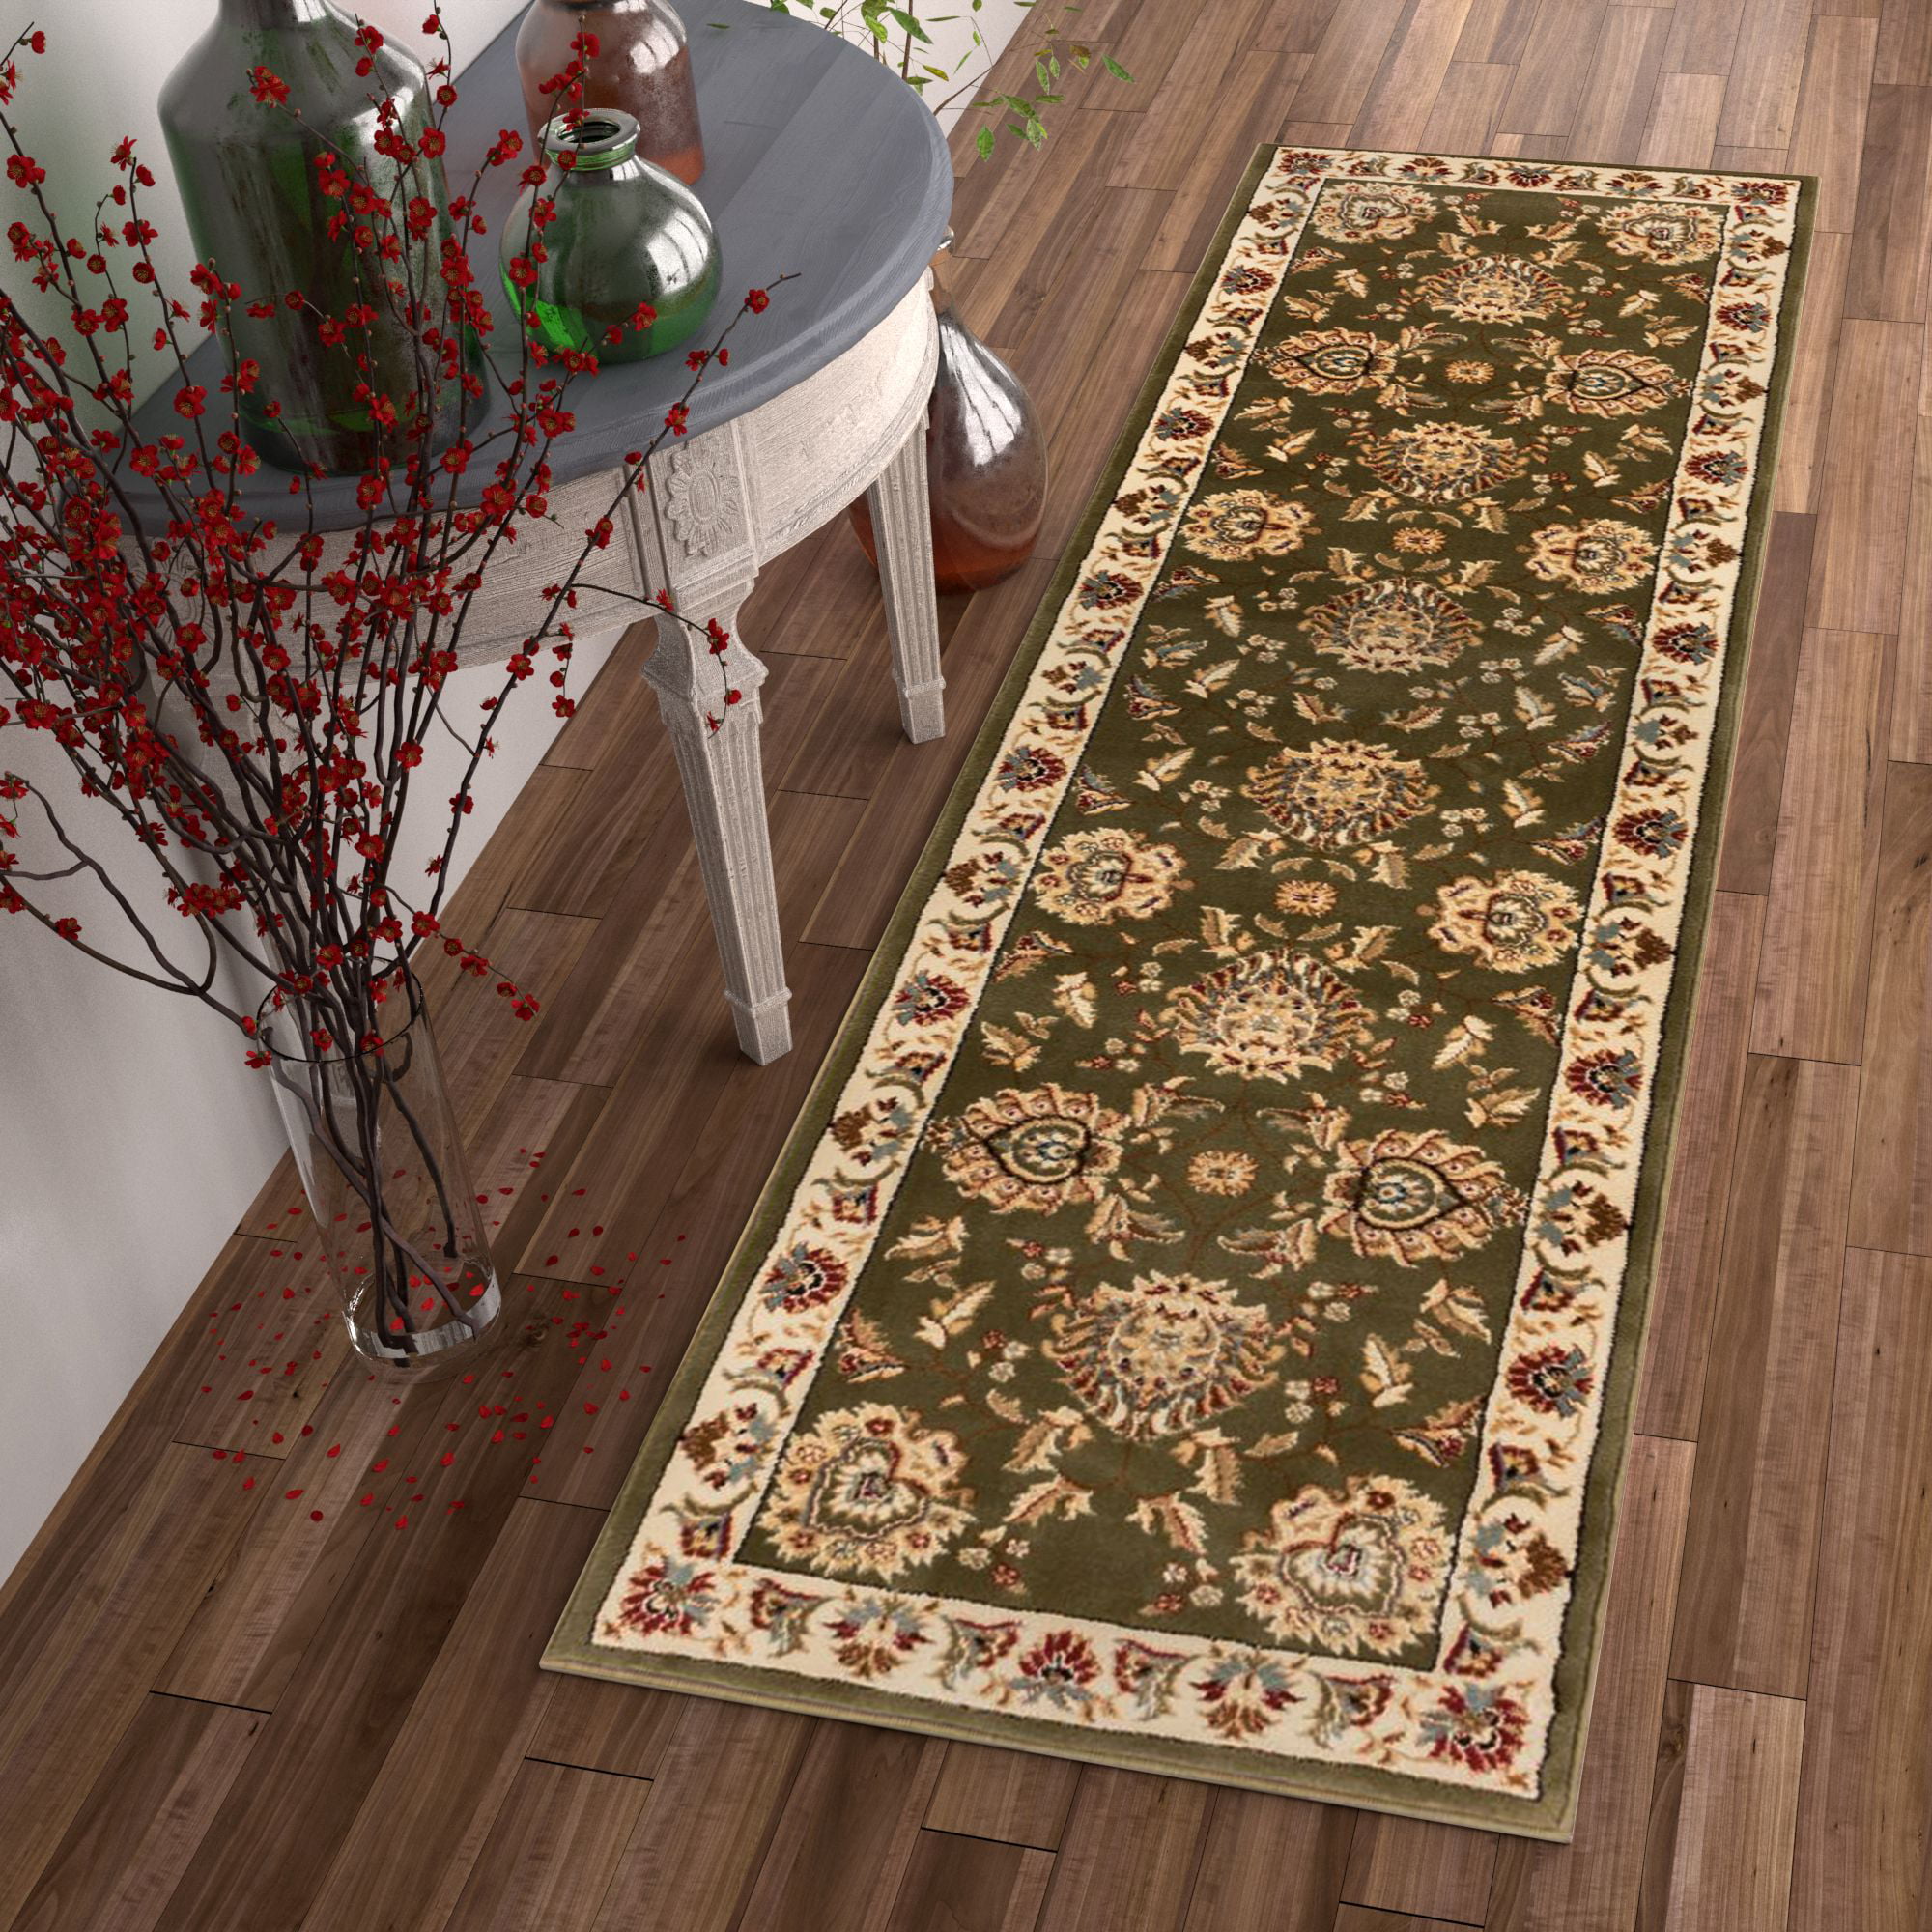 Traditional Floral Patchwork Door Mat Winter Garden Decor 60th Birthday Gift Square Area Rug Khaki Hall Rug